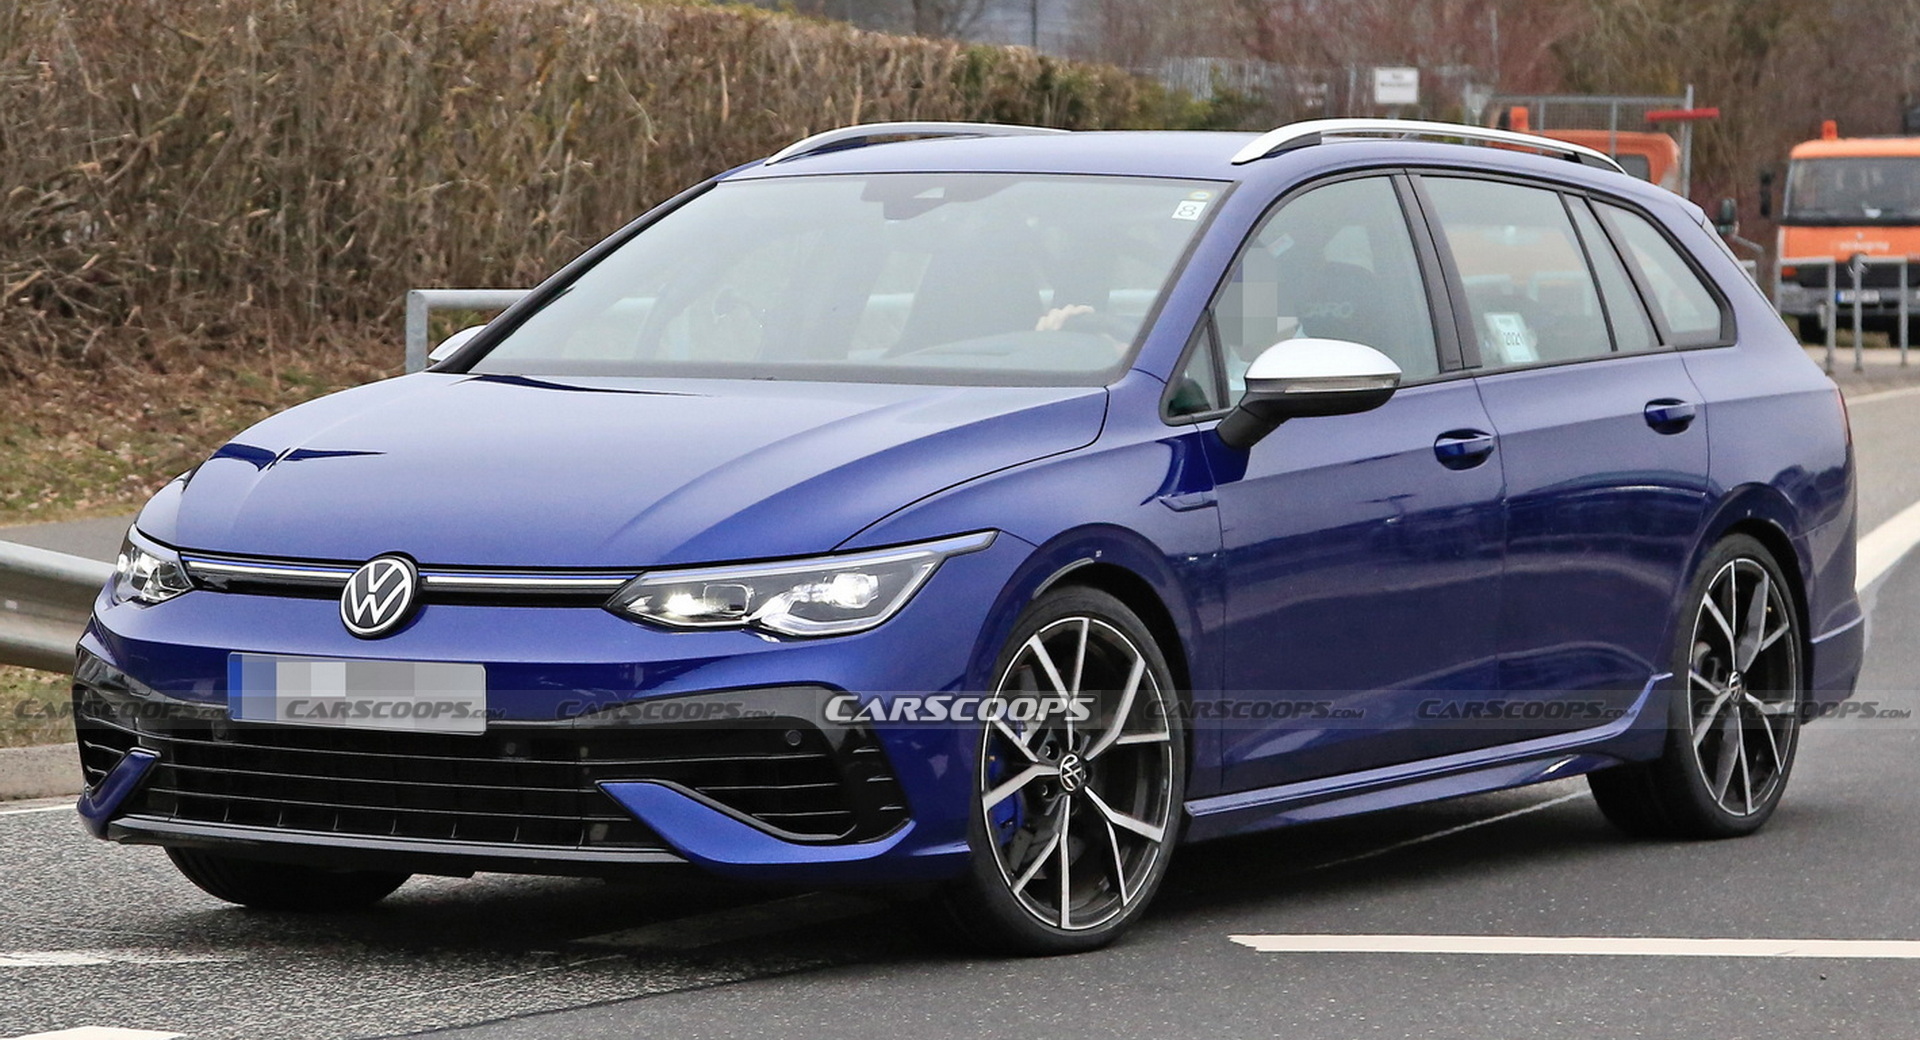 Gehoorzaam Beperking Vallen New VW Golf R Wagon Spotted With Non-Existent Camo At Nurburging | Carscoops